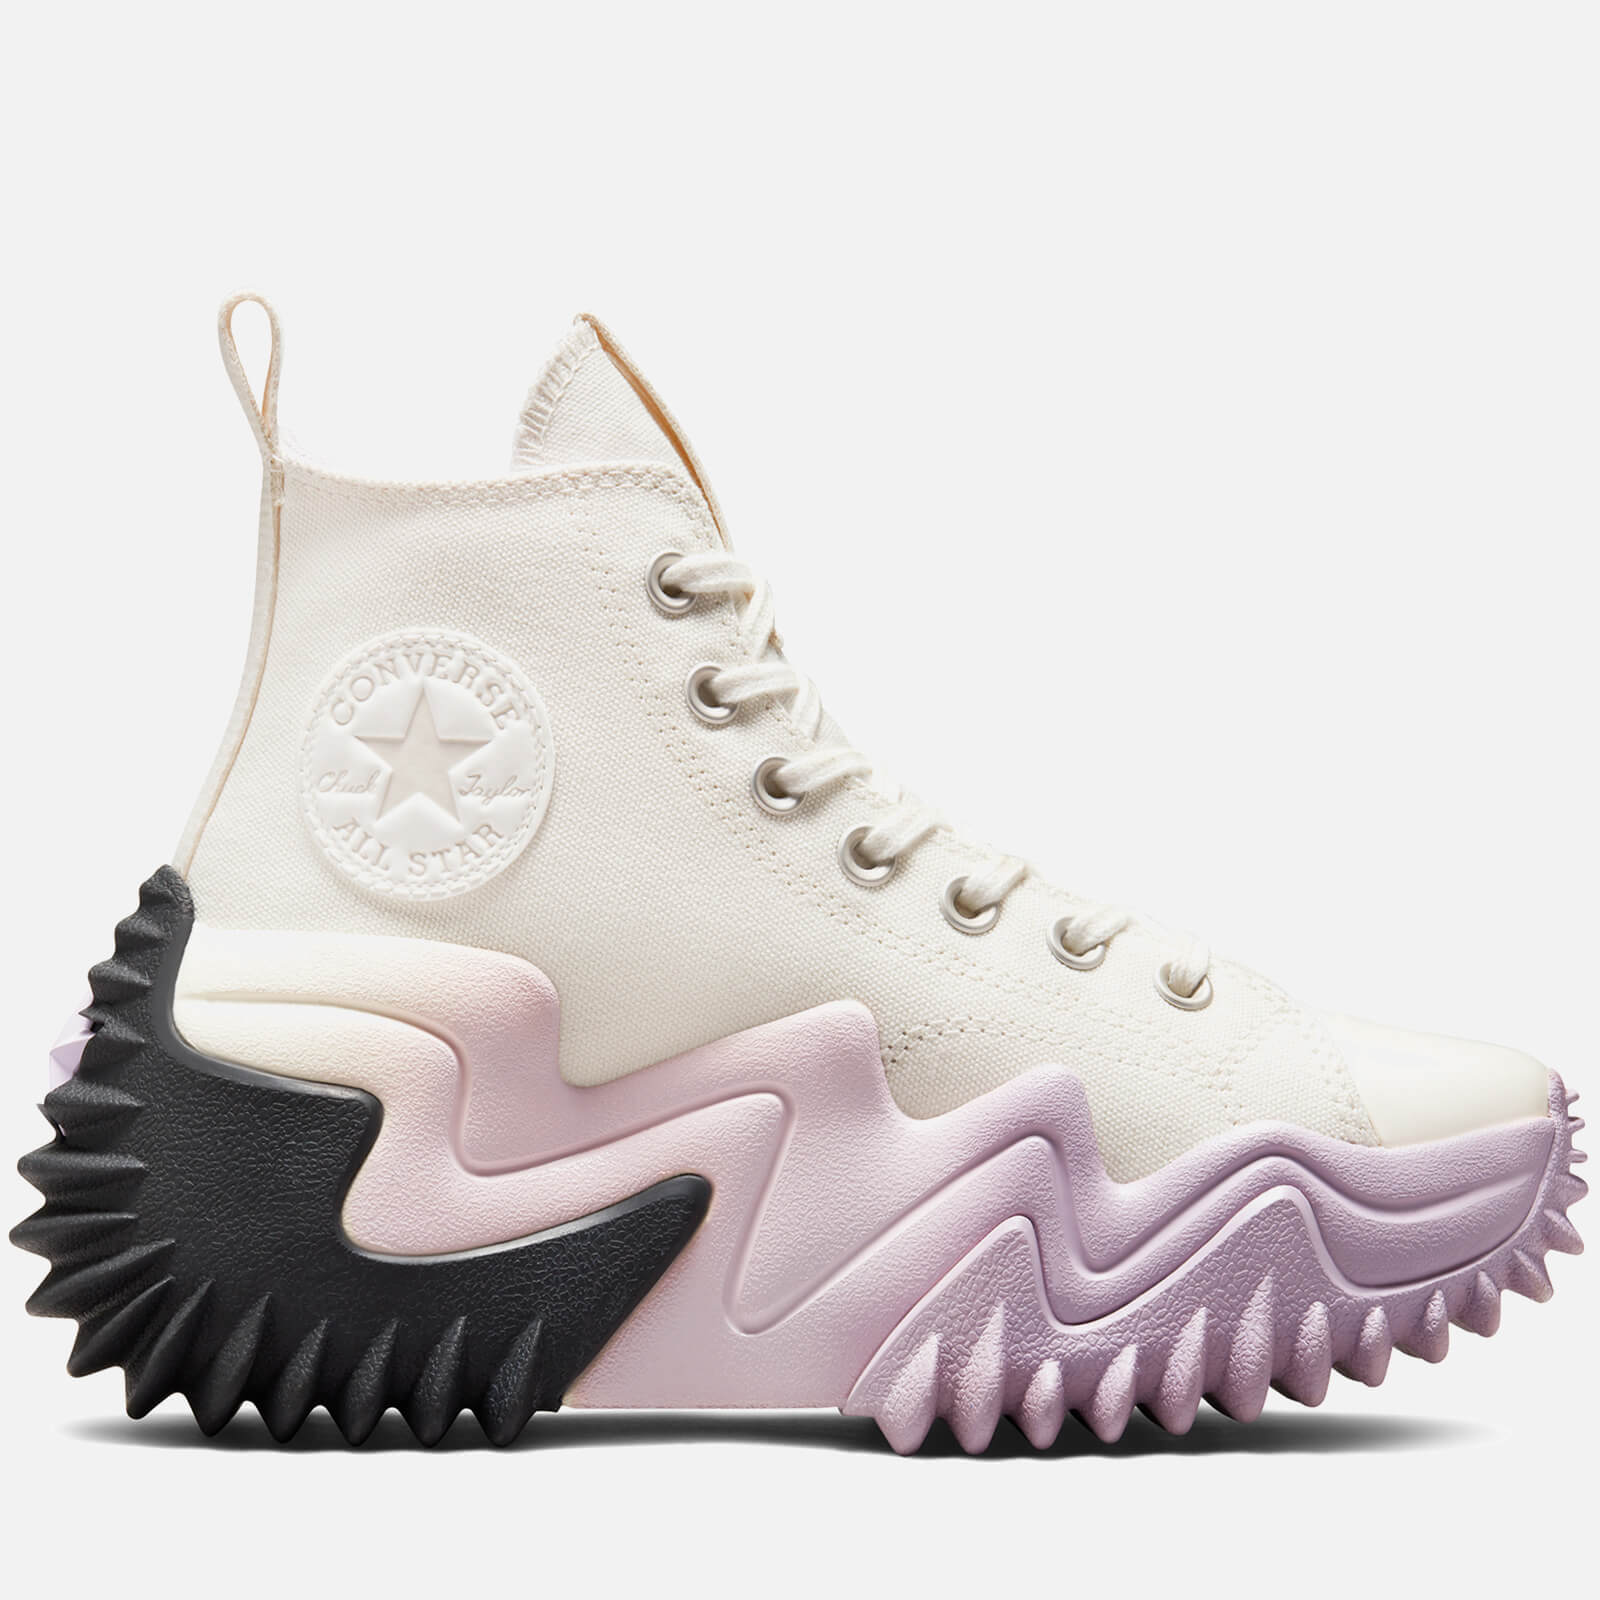 Converse Women's Run Star Motion All Star Mobility Hi-Top Trainers - Egret/Pale Amethyst/Storm Wind - UK 5